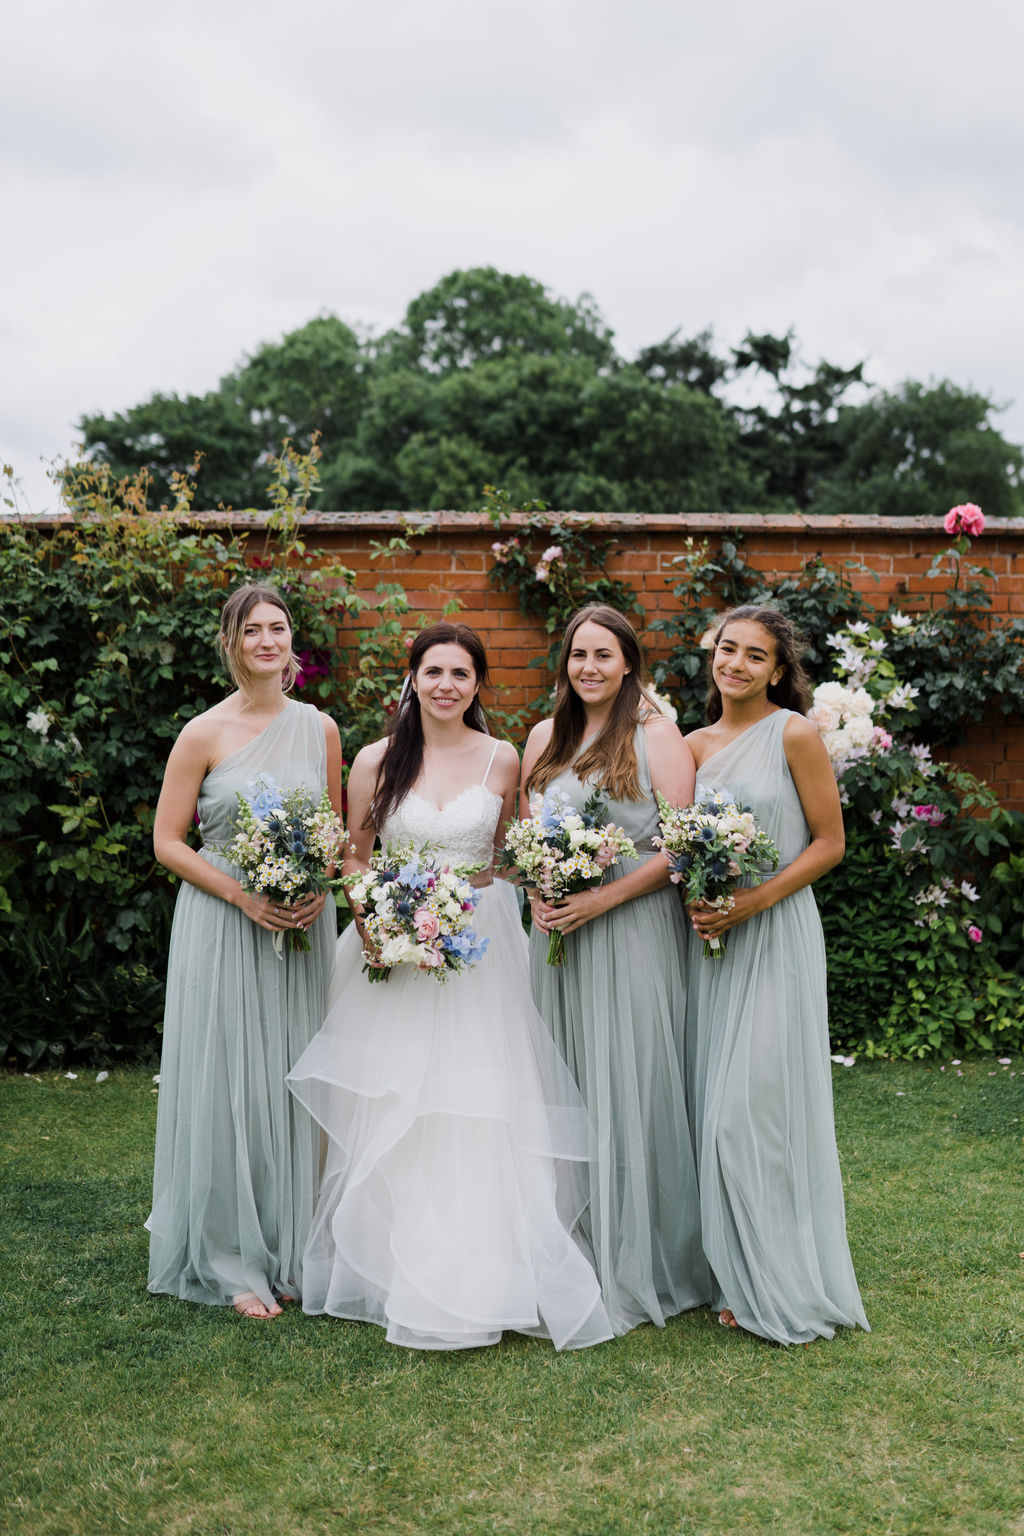 Upton Barn and Walled Gardens. The bride Lauren and her bride's maids.